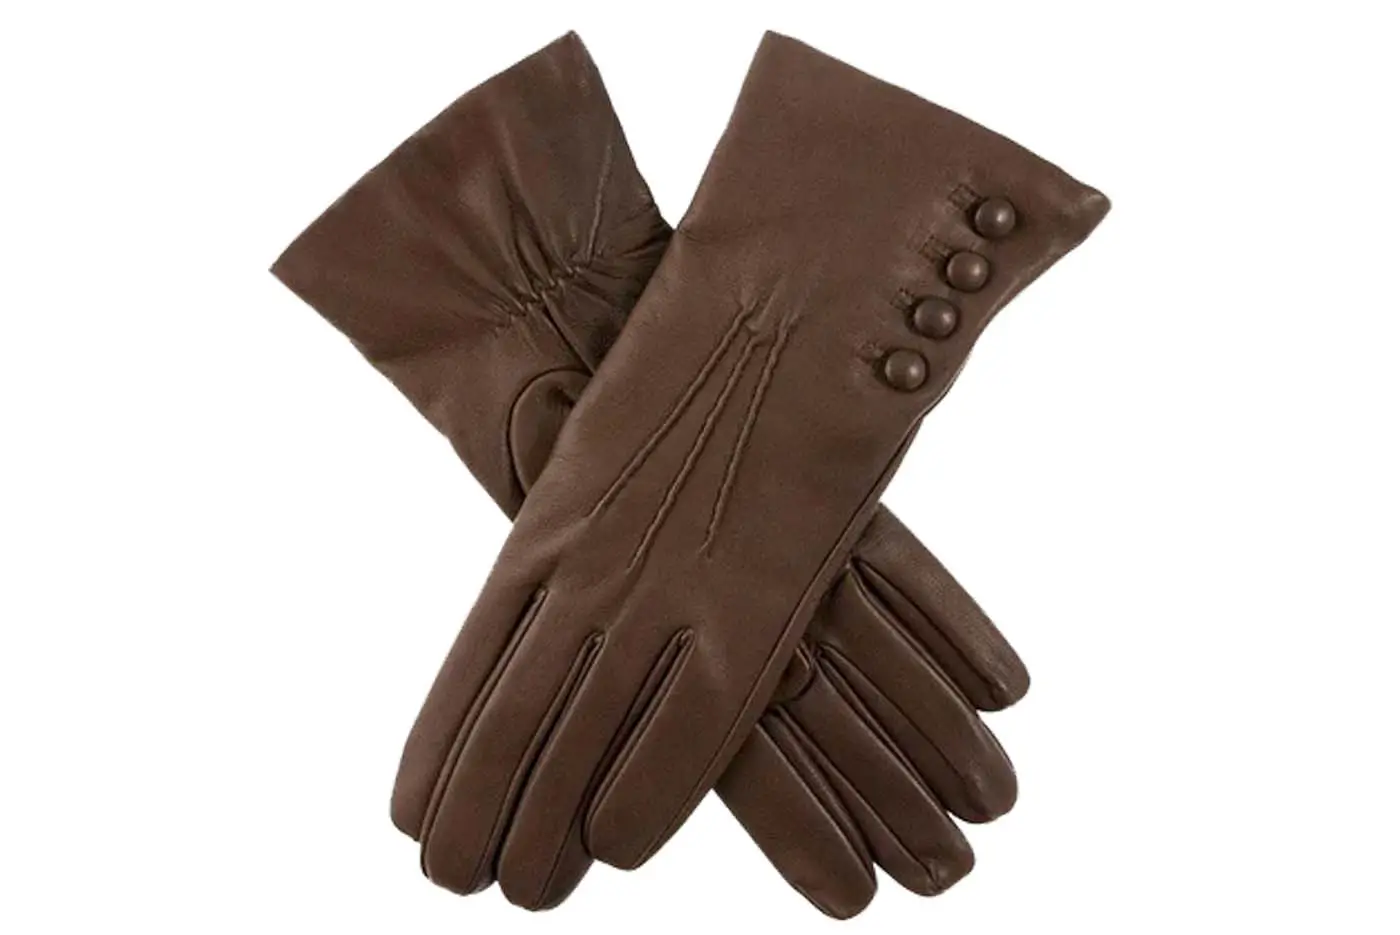 The Princess of Wales wore Dents Evelyn Womens Cashmere Lined Leather Gloves